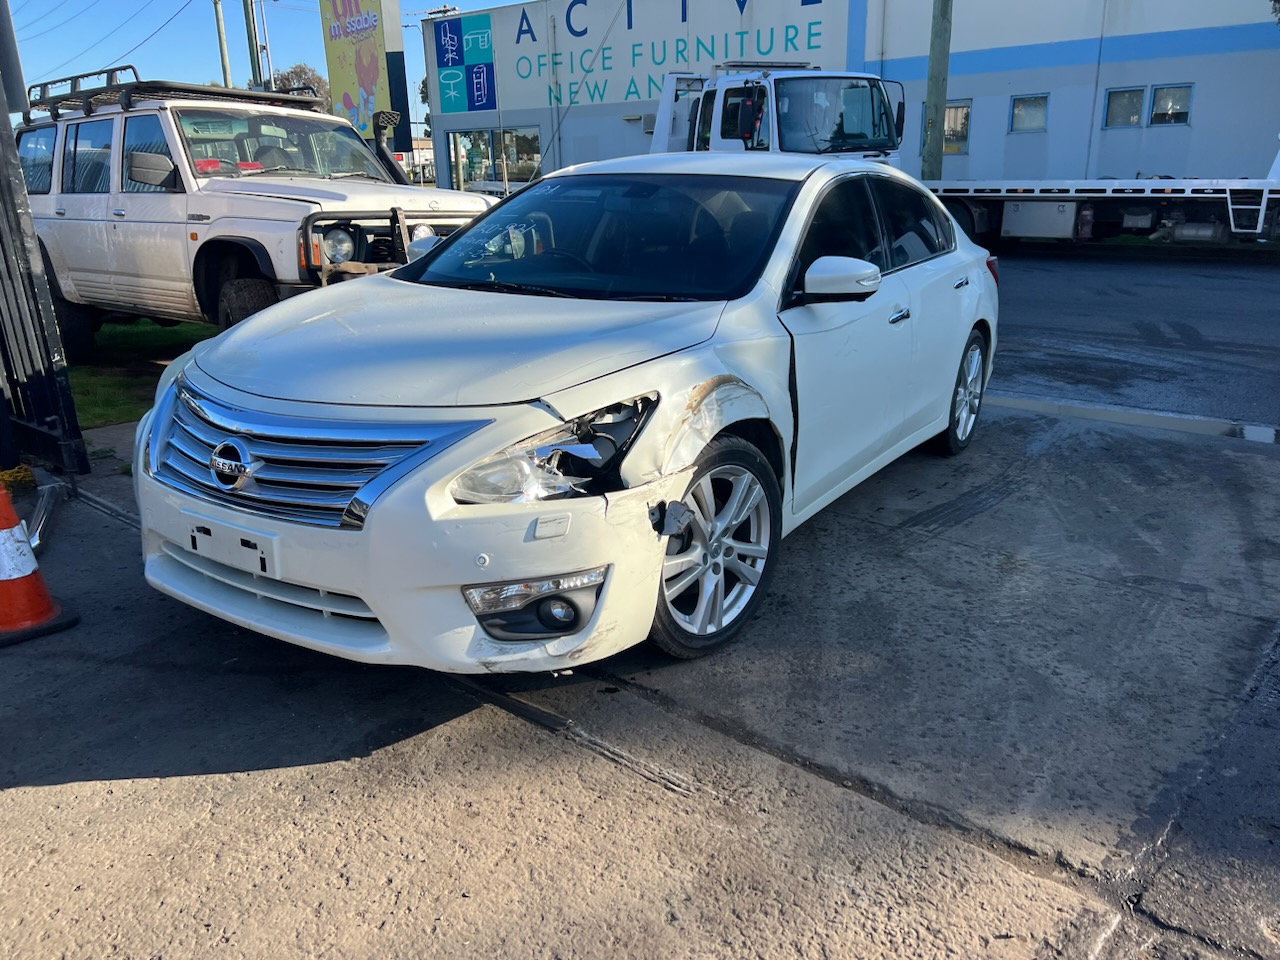 PARTING OUT NISSAN ALTIMA L33 Ti-S VQ35 V6 CVT AUTOMATIC WHITE 2015 WRECKING / PARTS FOR SALE